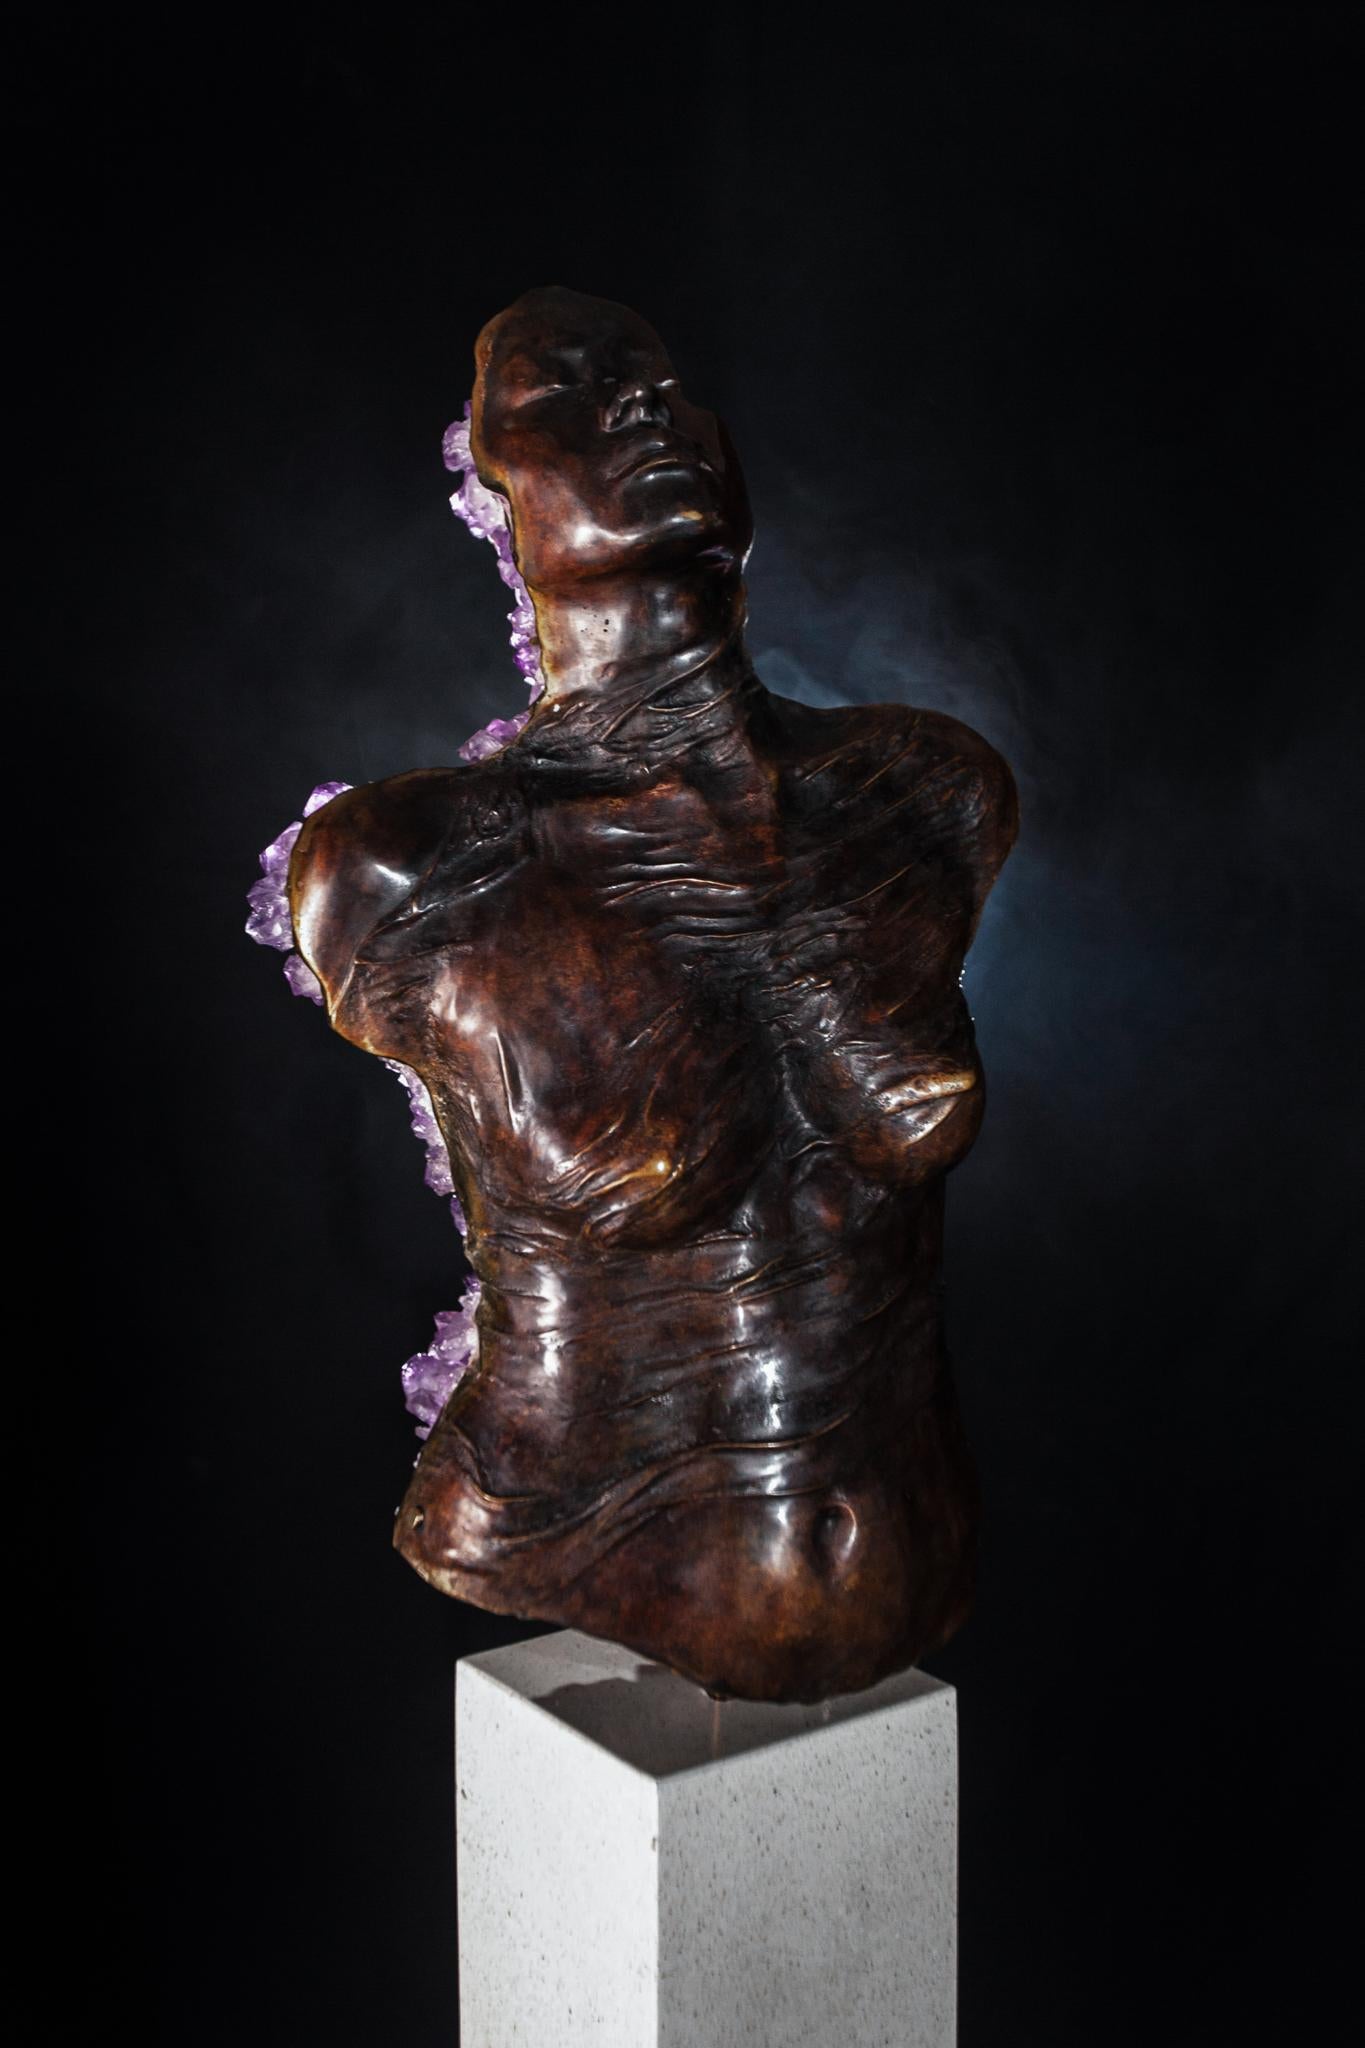 LIMINAL STATE  Amethyst crystals, bronze sculpture - Sculpture by James Lomax